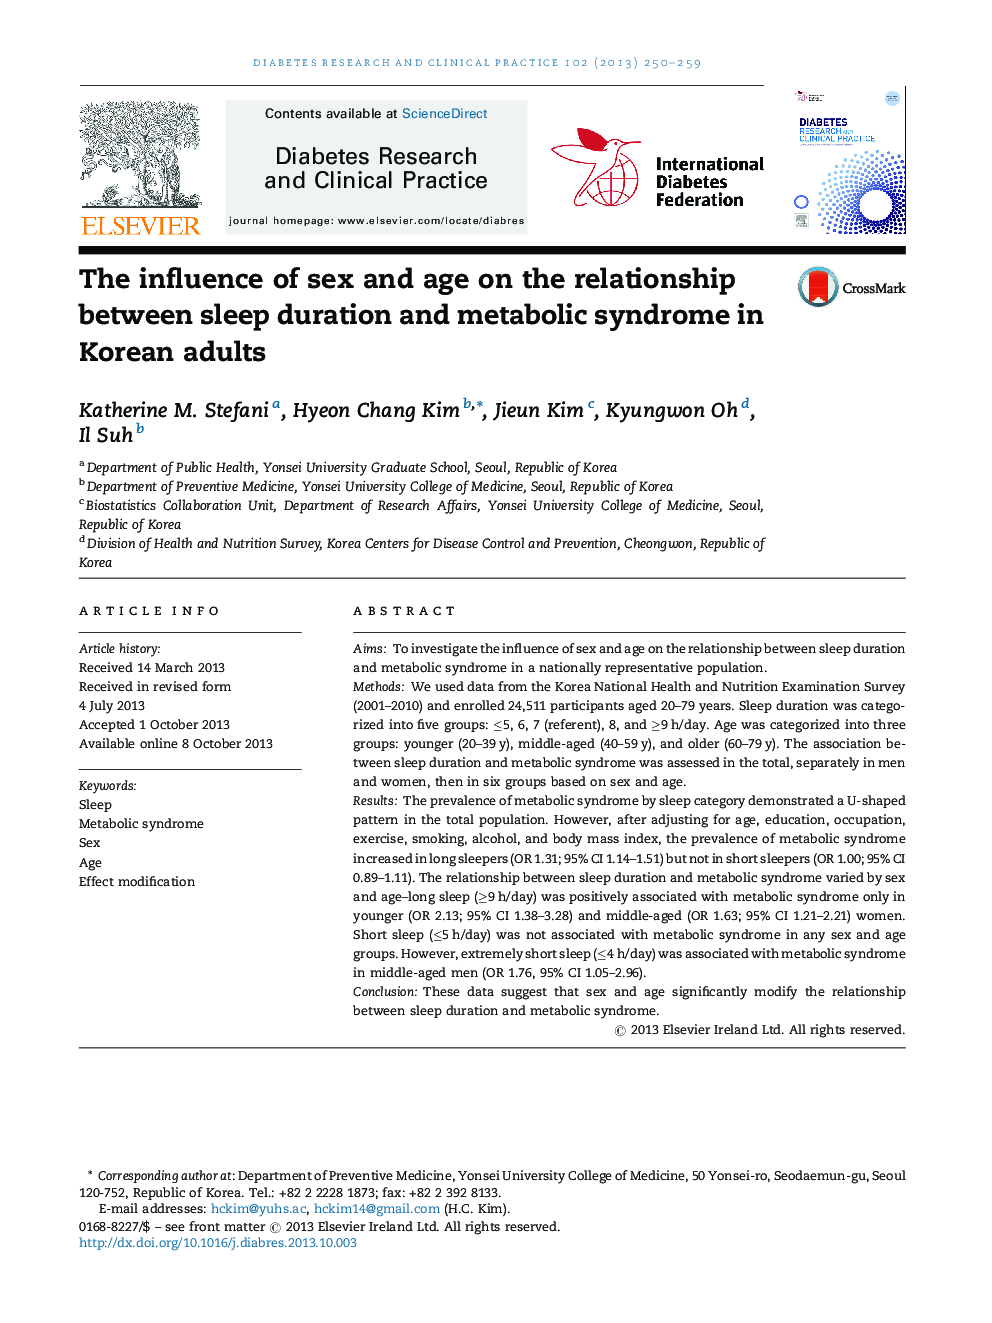 The influence of sex and age on the relationship between sleep duration and metabolic syndrome in Korean adults